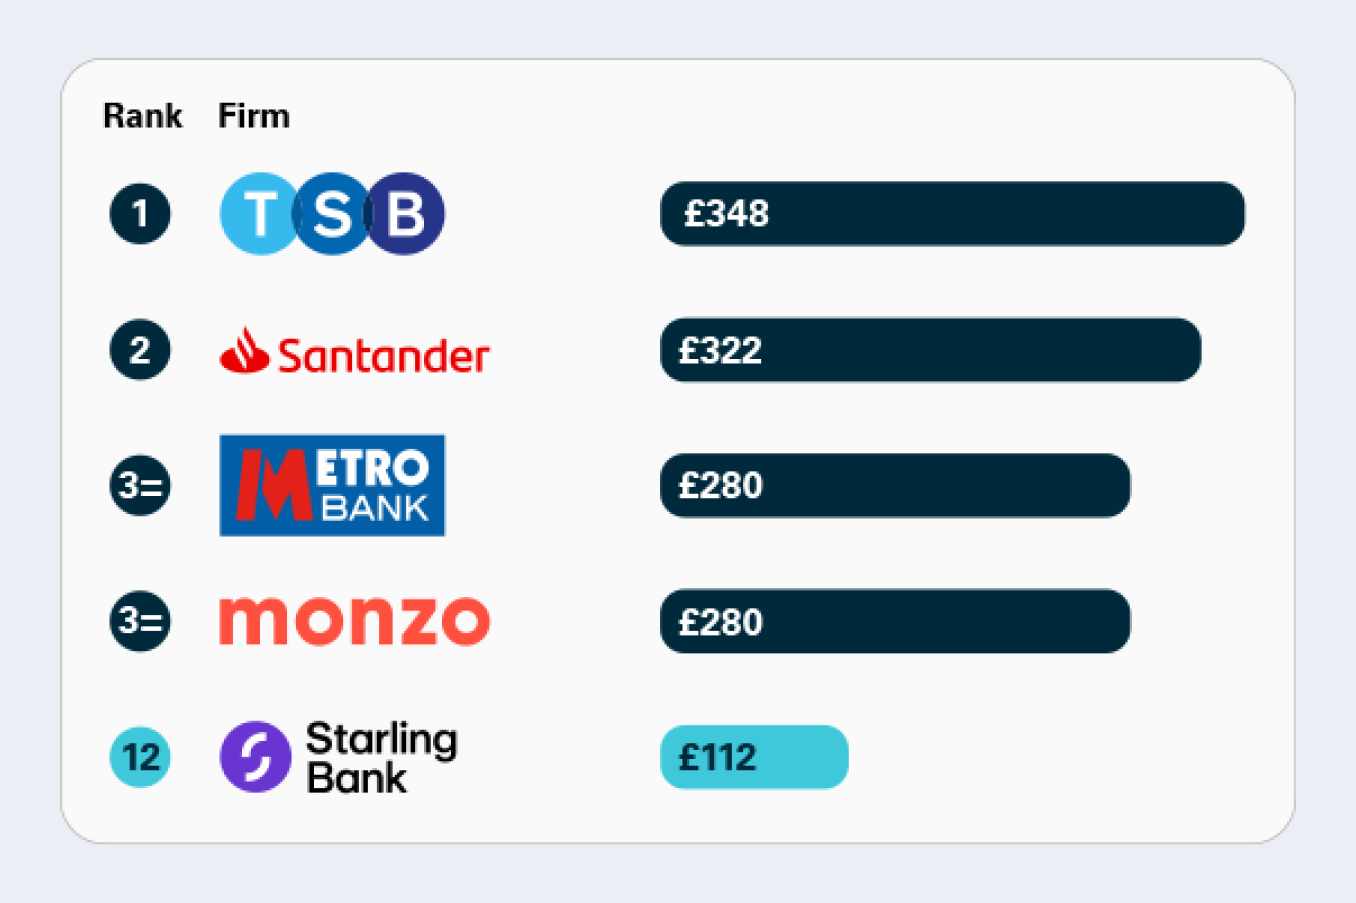 This data shows the amount of APP fraud sent per million pounds of transactions, out of 14 firms. Lower figure is better. 1. TSB = £348, 2. Santander = £322, 3. MetroBank = £280, 4.Monzo = £280, 12. Starling Bank = £112